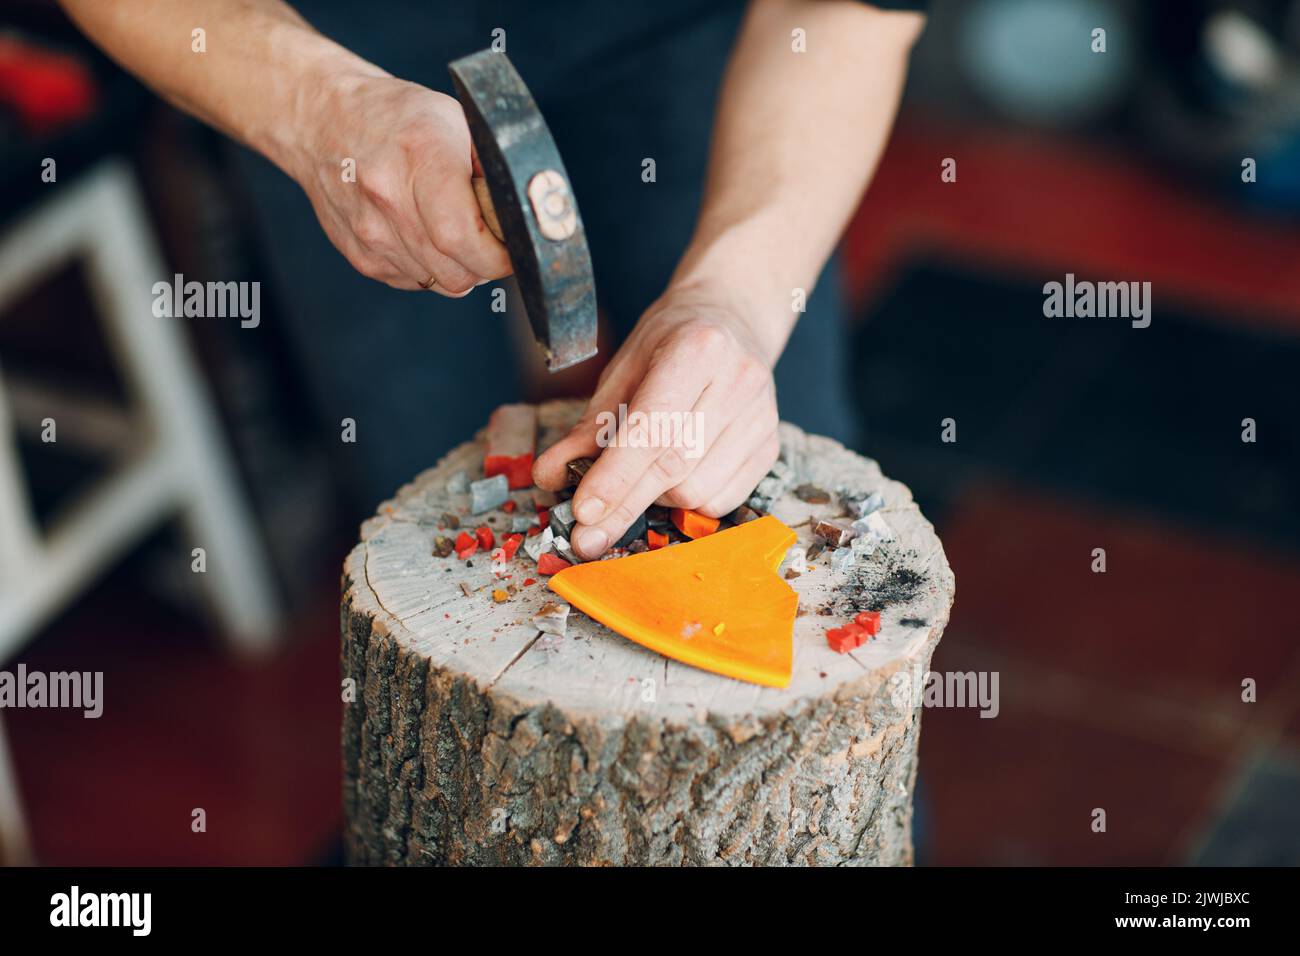 Craftsman cutting breaking smalt glass with hammer for mosaic artwork in workshop. Stock Photo